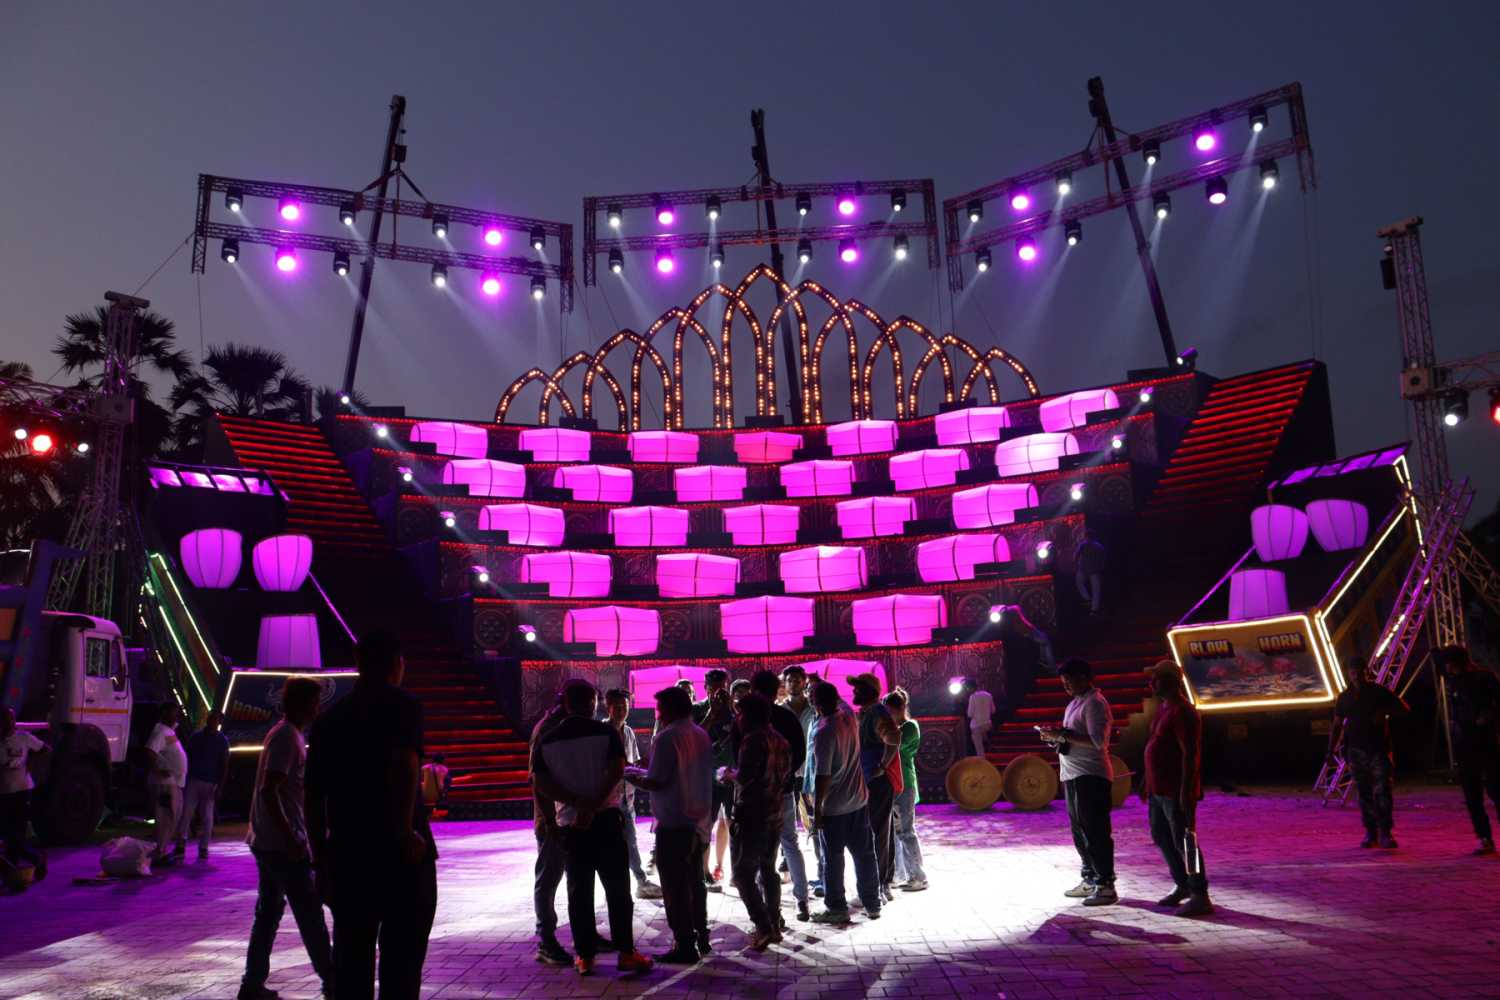 Light Craft undertook the responsibility of creating lighting designs for the three songs